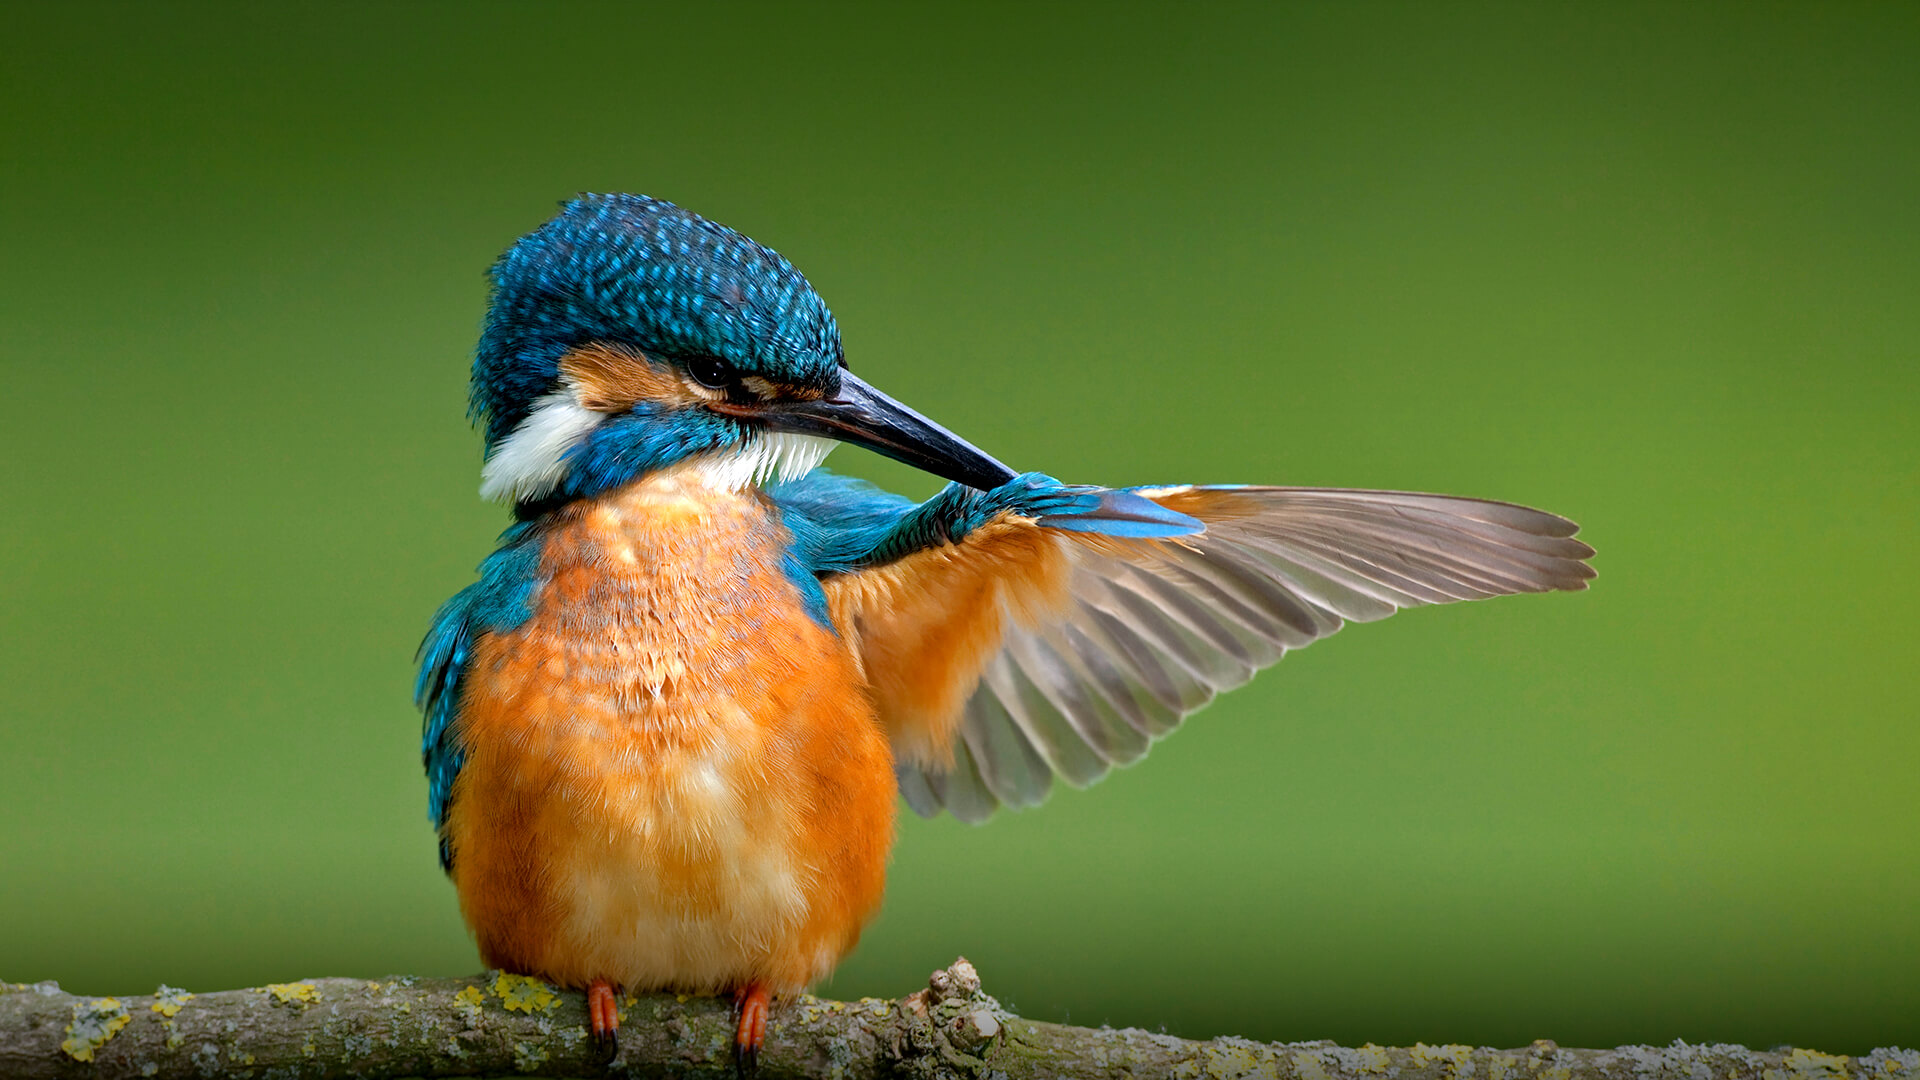 A kingfisher preening its extended wing